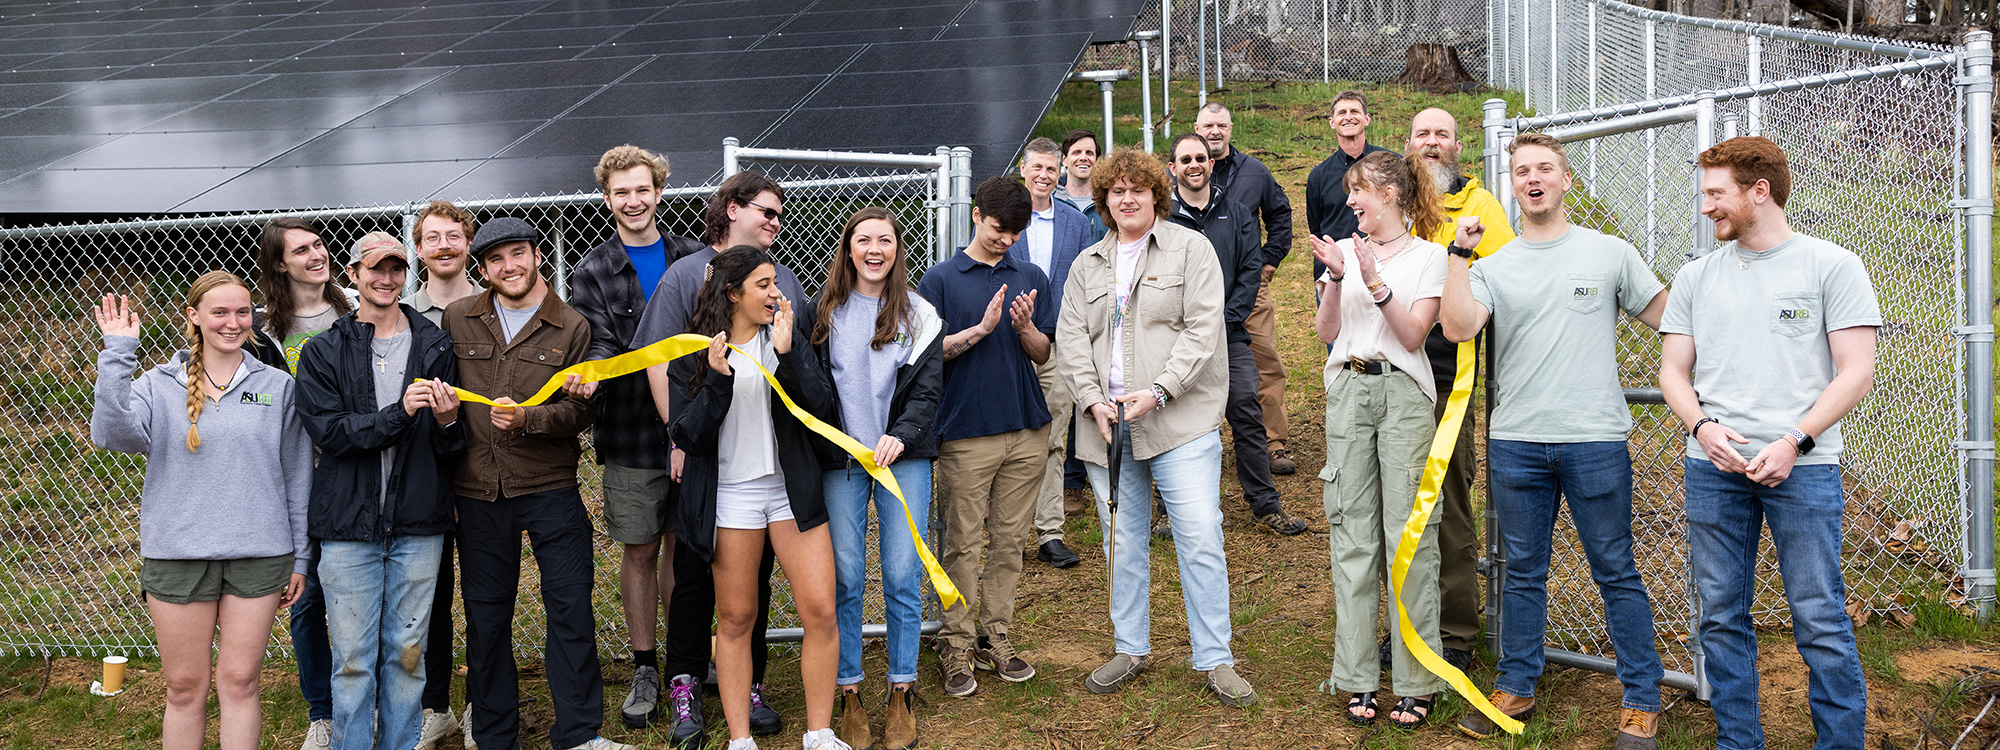 App State students unveil new solar array near State Farm Road